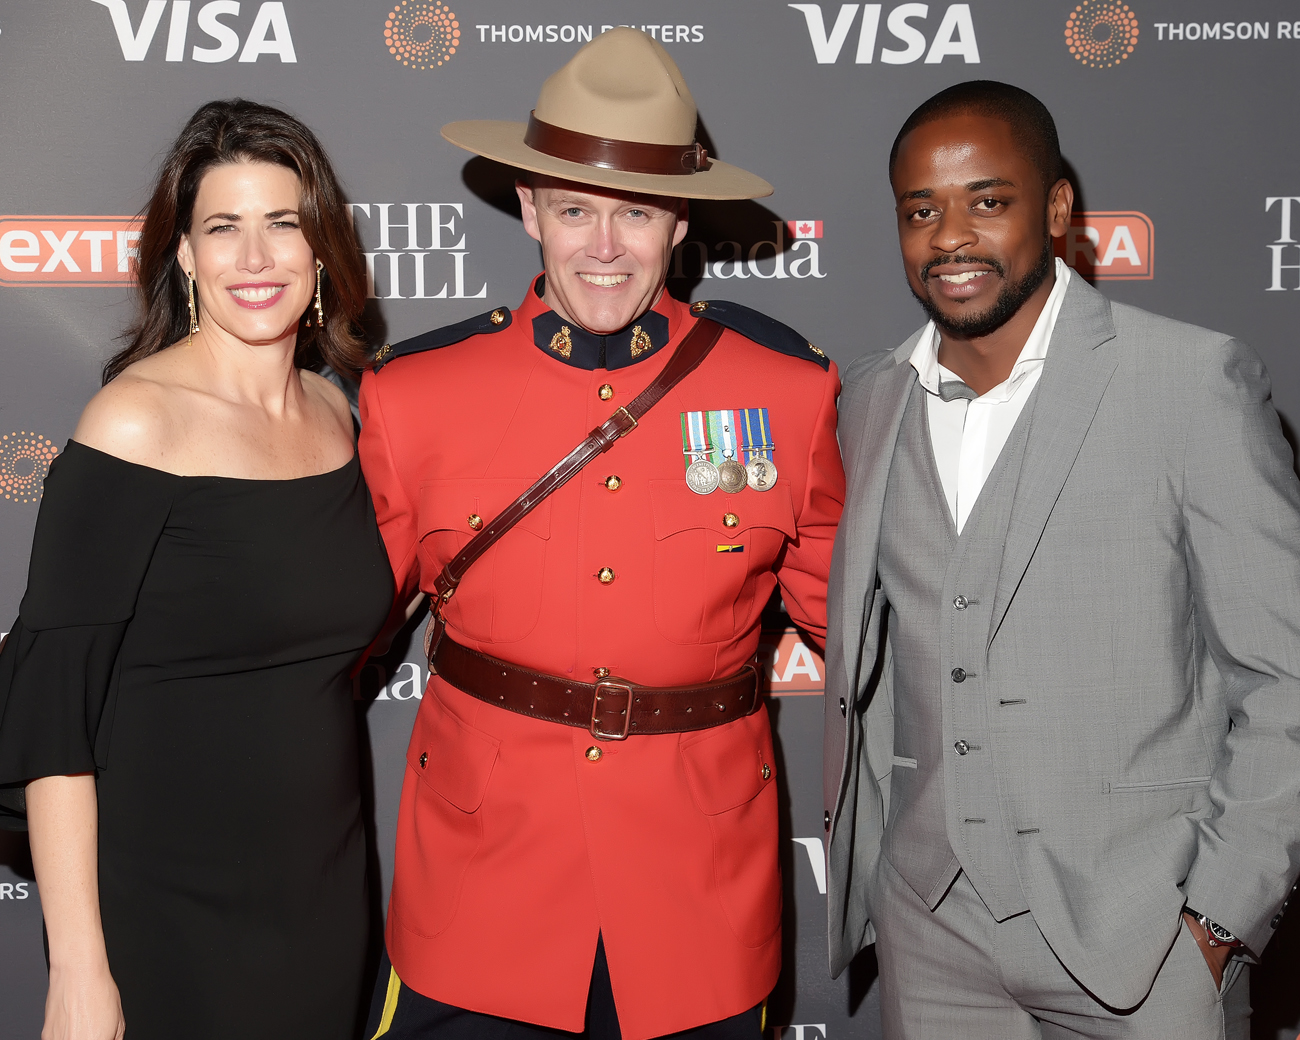 A "West Wing" reunion with actress Melissa Fitzgerald and Dule Hill, joined by Canadian Mountie John Fitzgerald, at  The Hill/Extra/Embassy of Canada WHCD pre-party in Washington D.C. on Friday April 29. (Shannon Finney Photography)